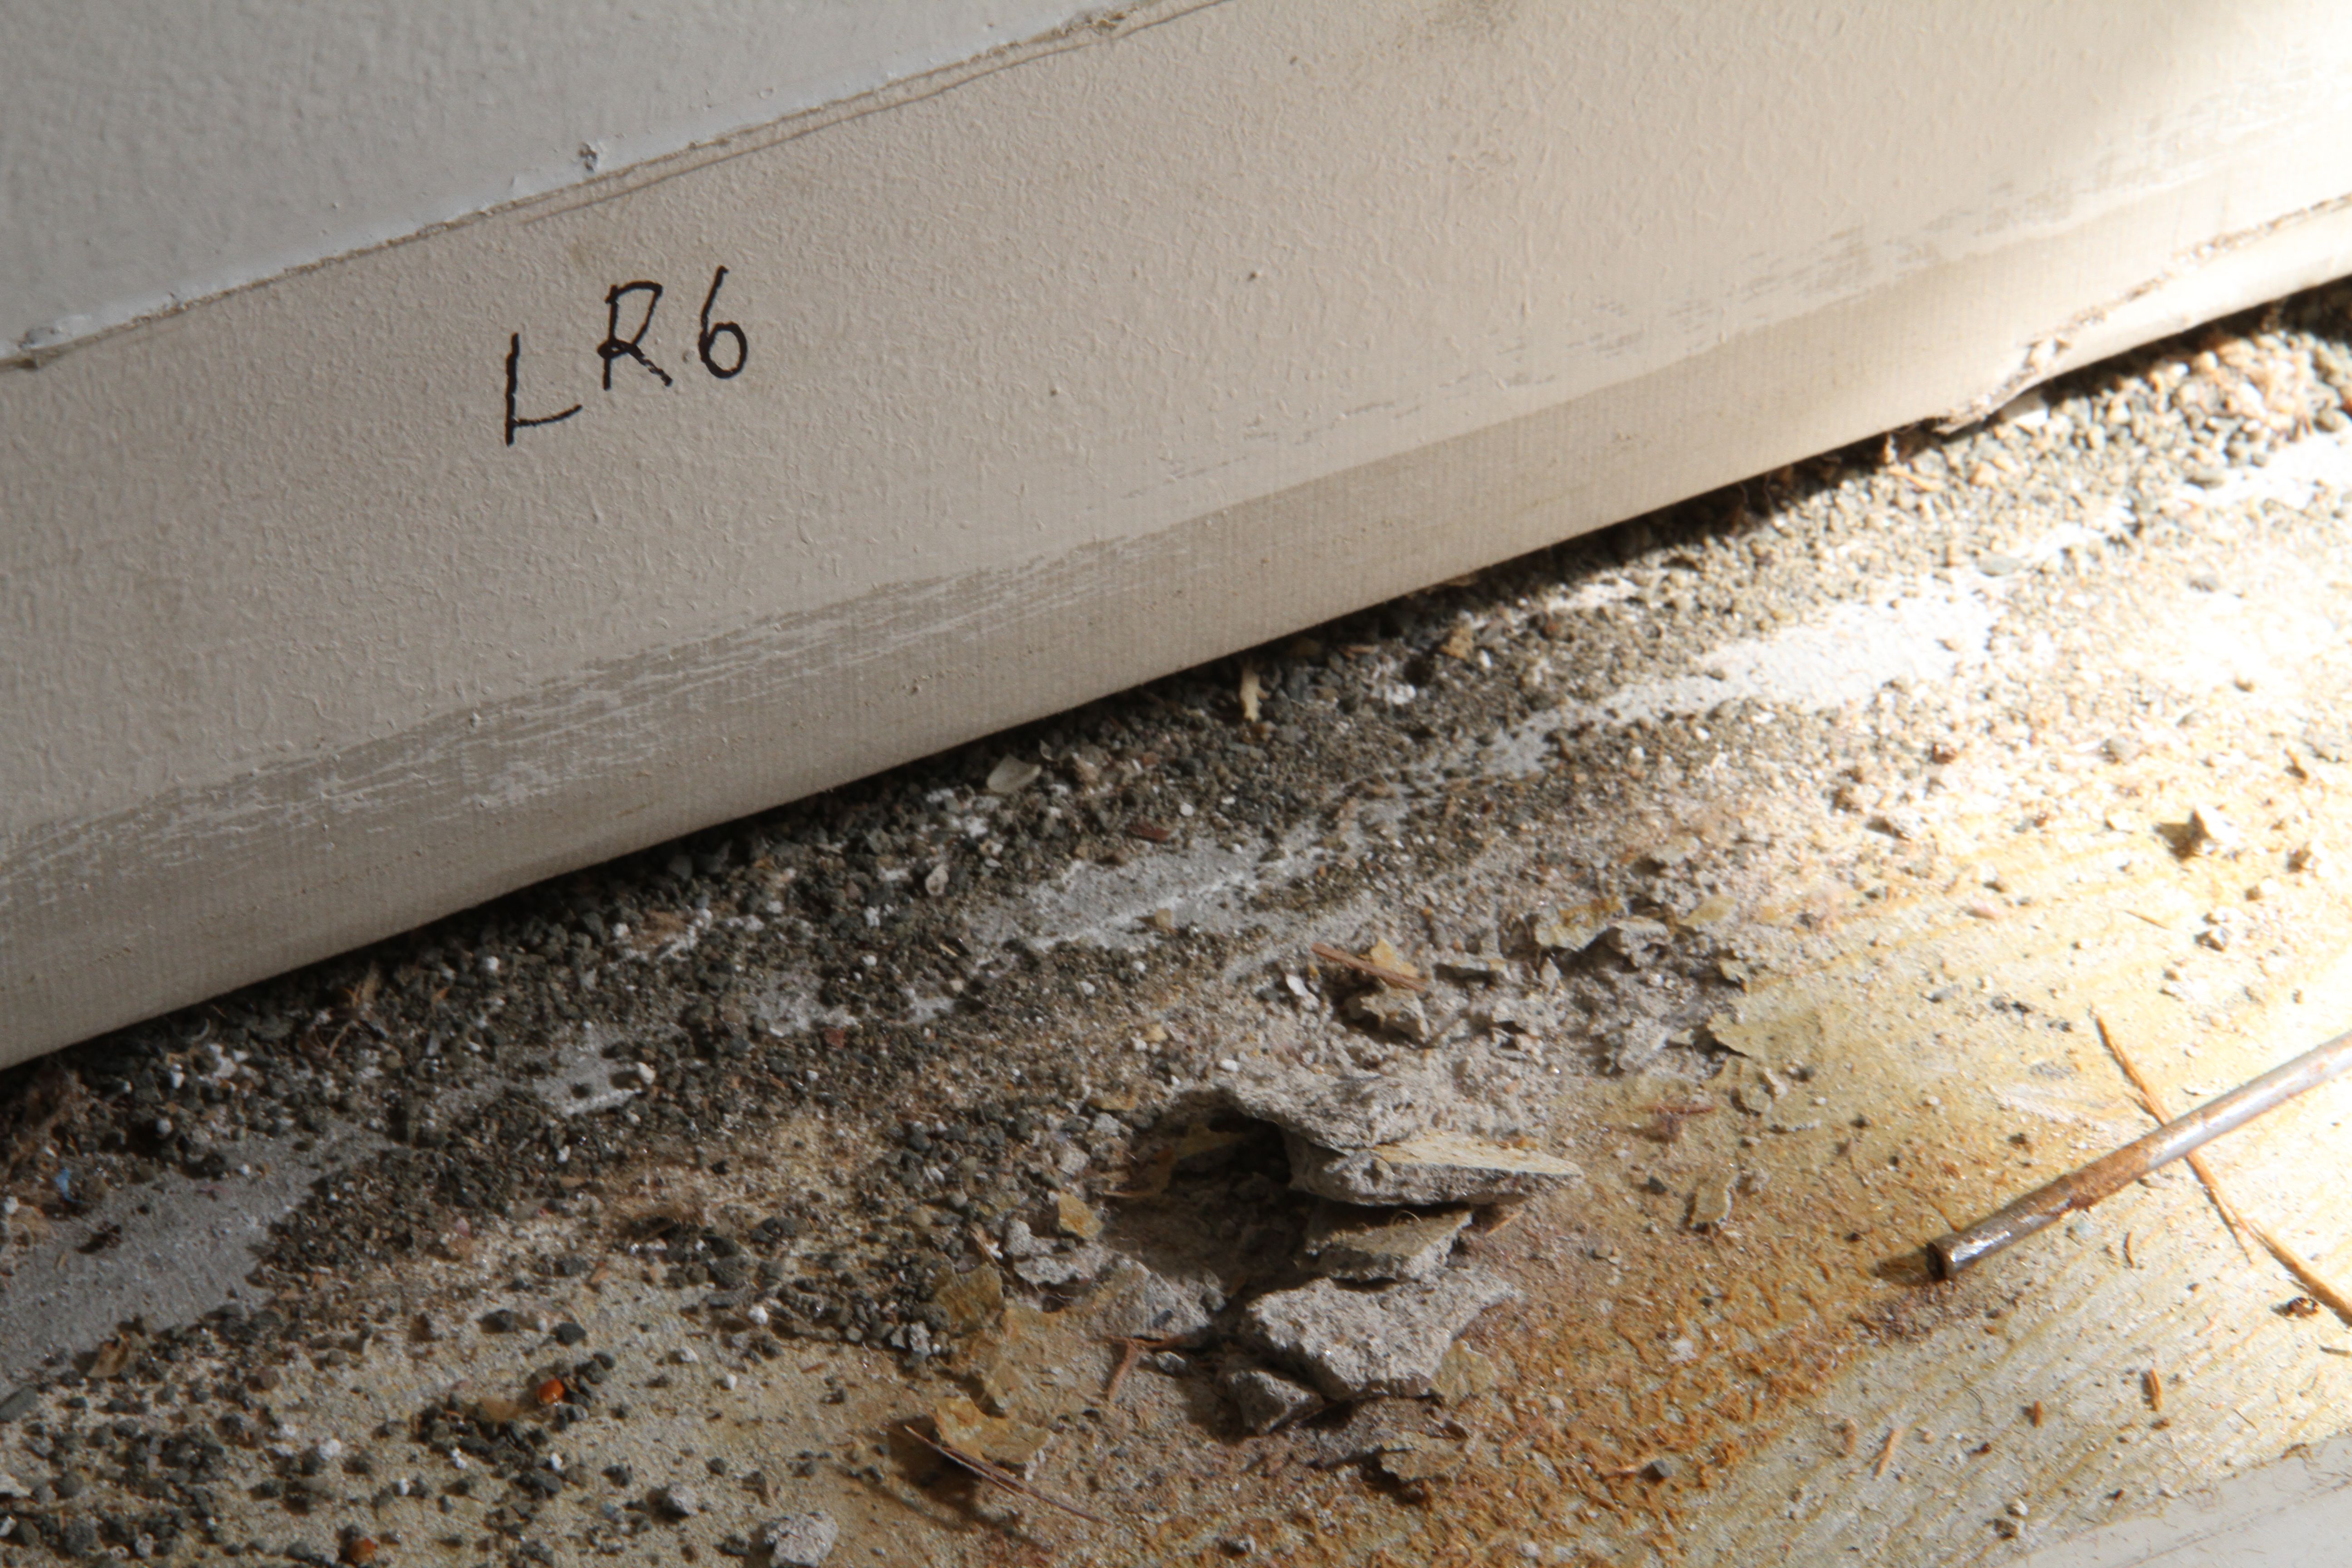 Each baseboard molding had to be labeled, as did its corresponding place on the wall, so that we can reuse them again.